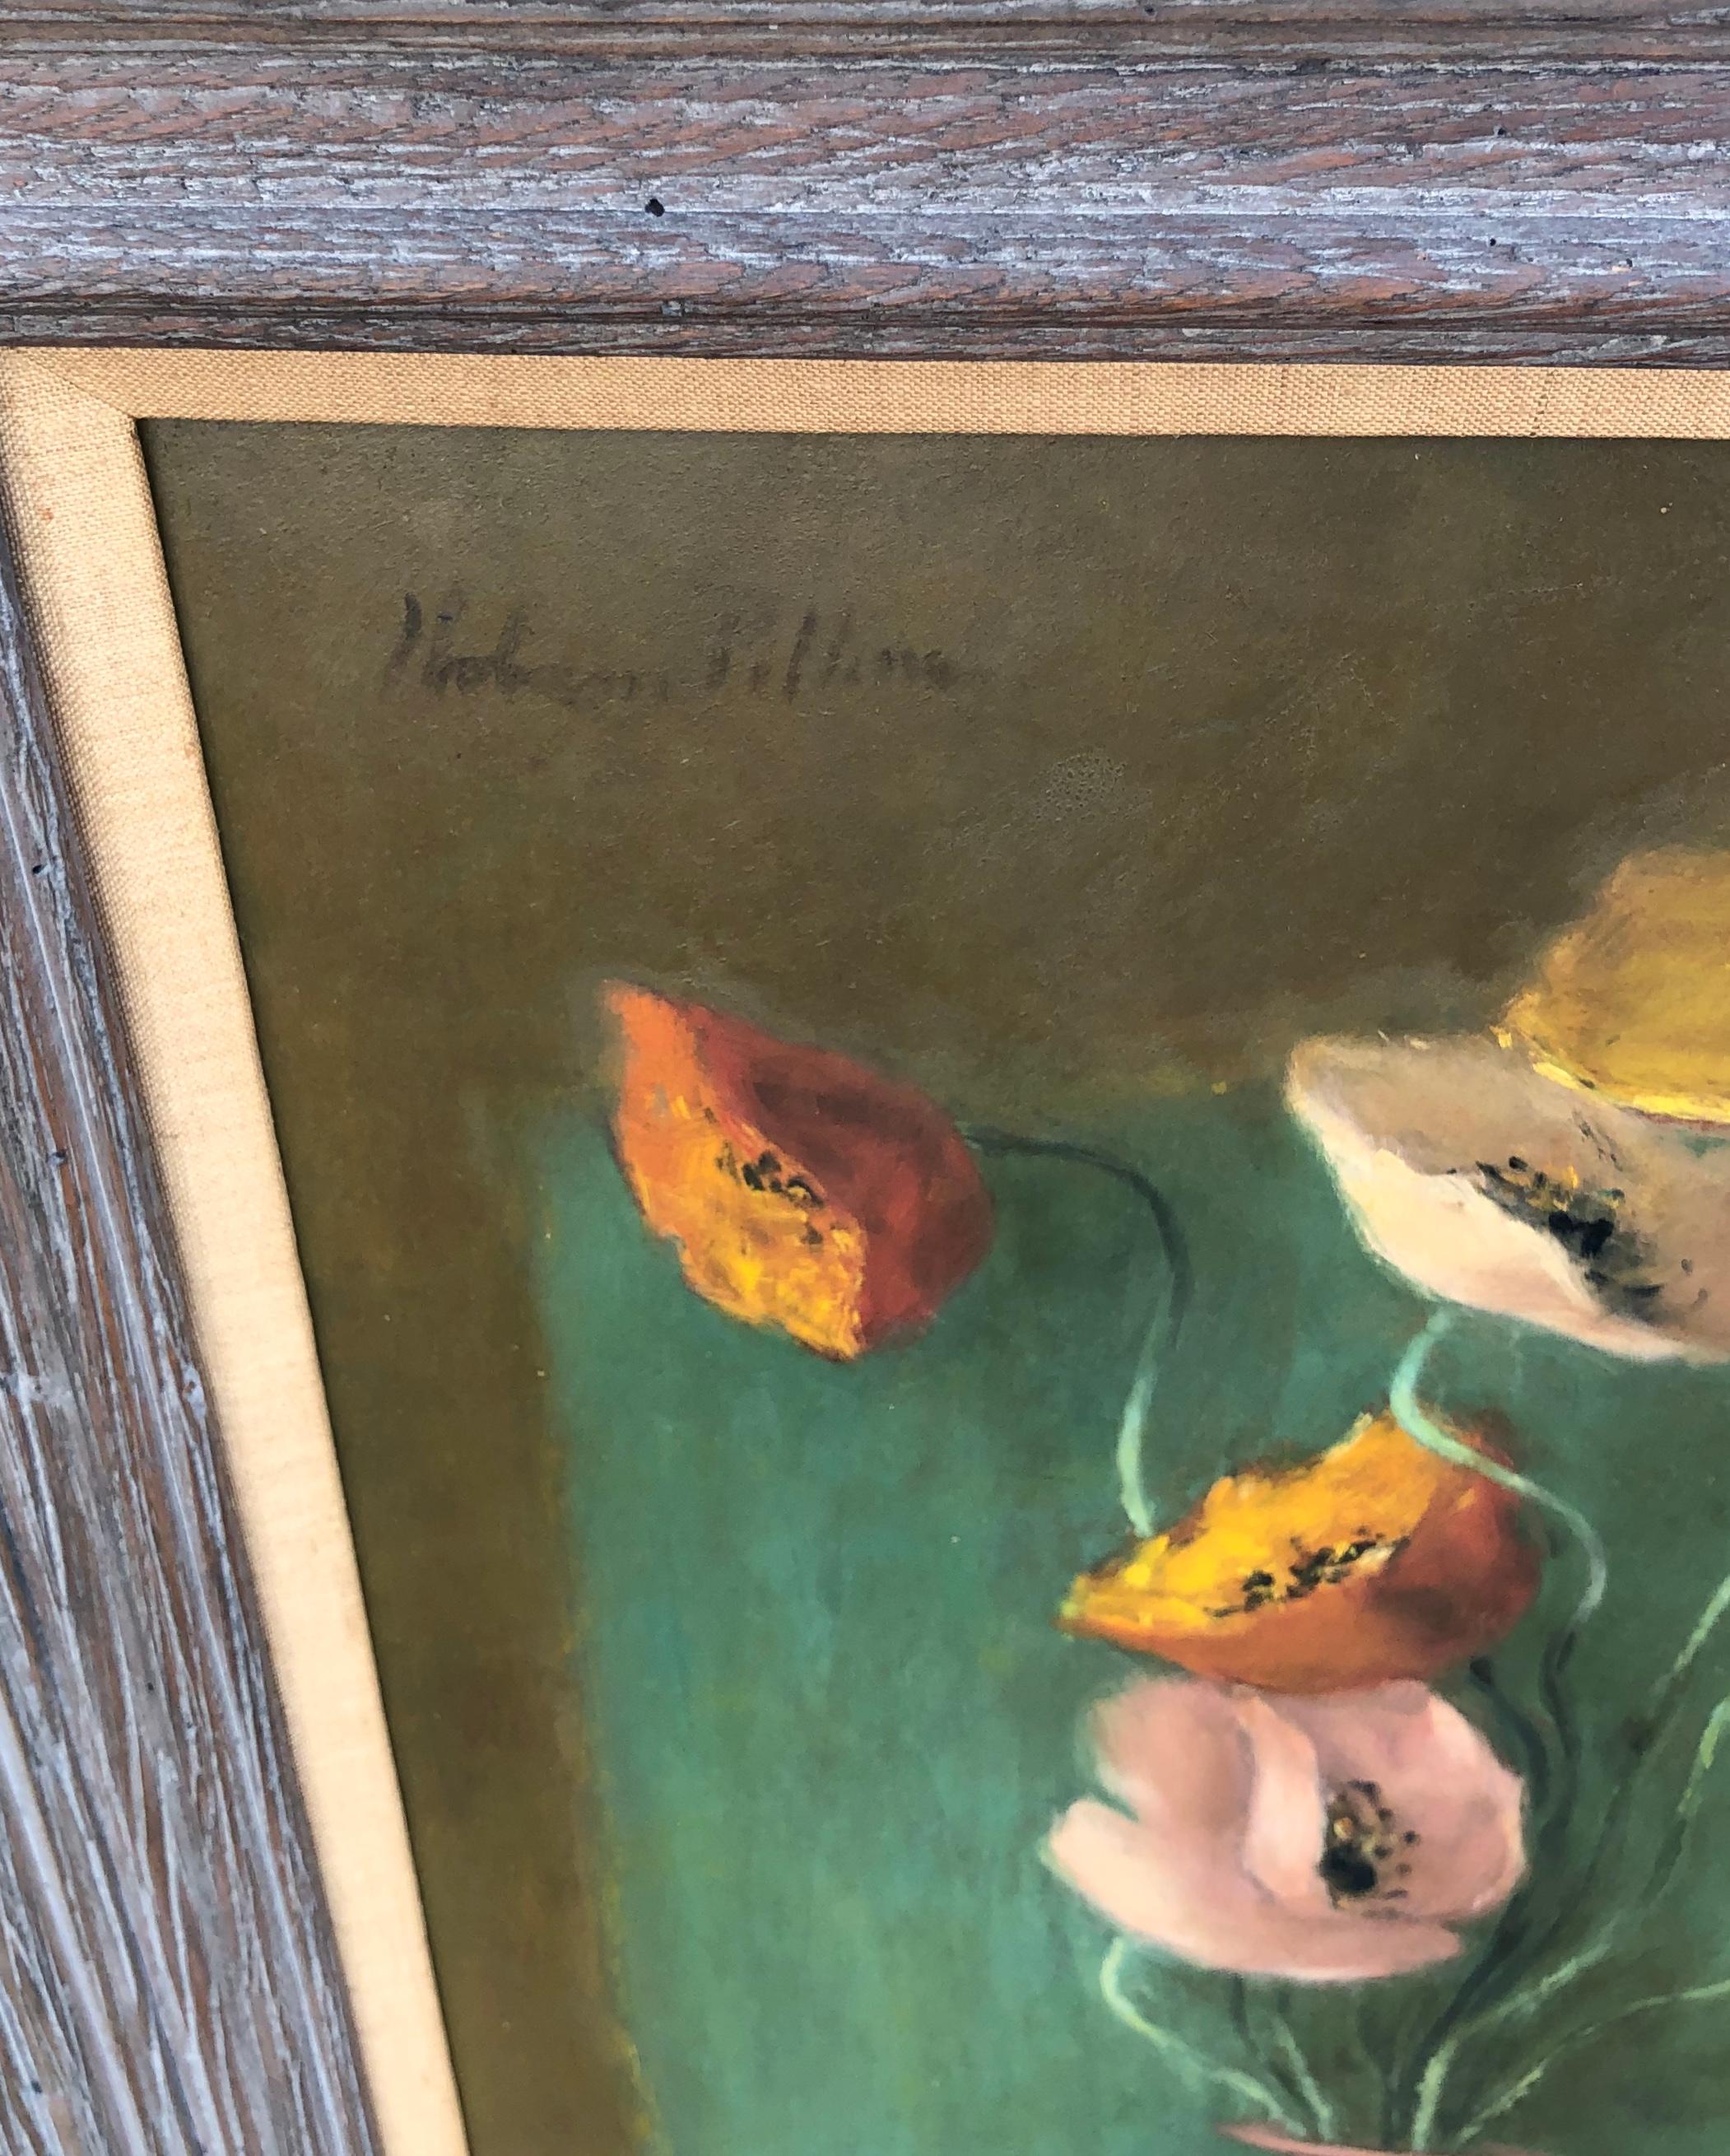 Hobson Pittman (1899-1972)
Signed upper left. Oil on panel.
Provenance: Boca Raton Museum of Art
Many examples of Pittman's paintings can be found in numerous museum collections, including the Met in NY. Measures 25.5